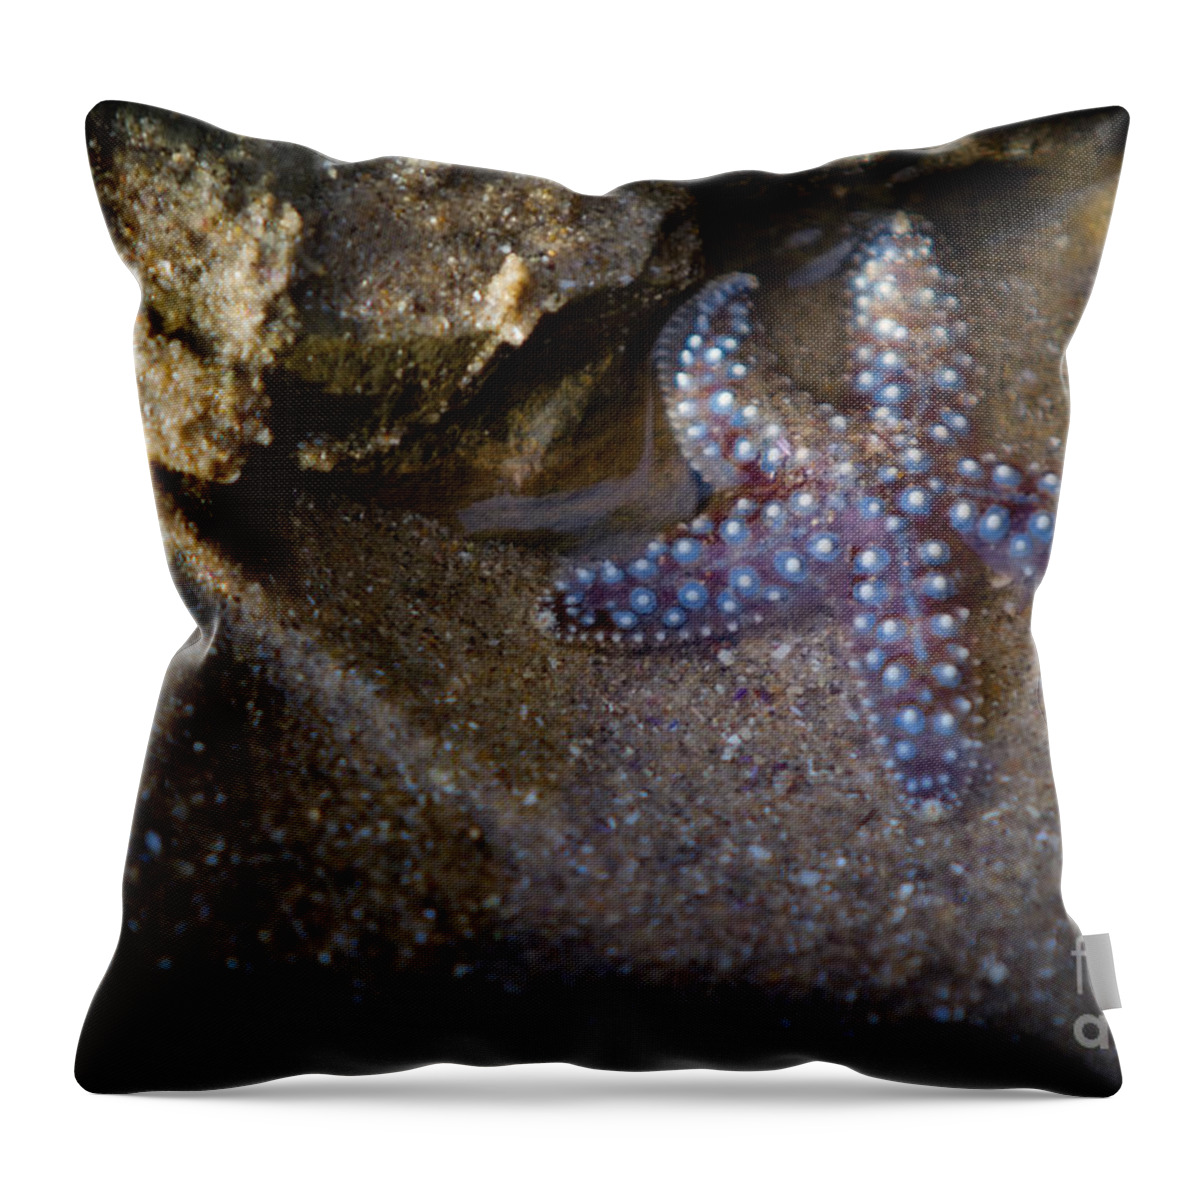 San Diego Throw Pillow featuring the photograph Lone Seastar by Doug Sturgess